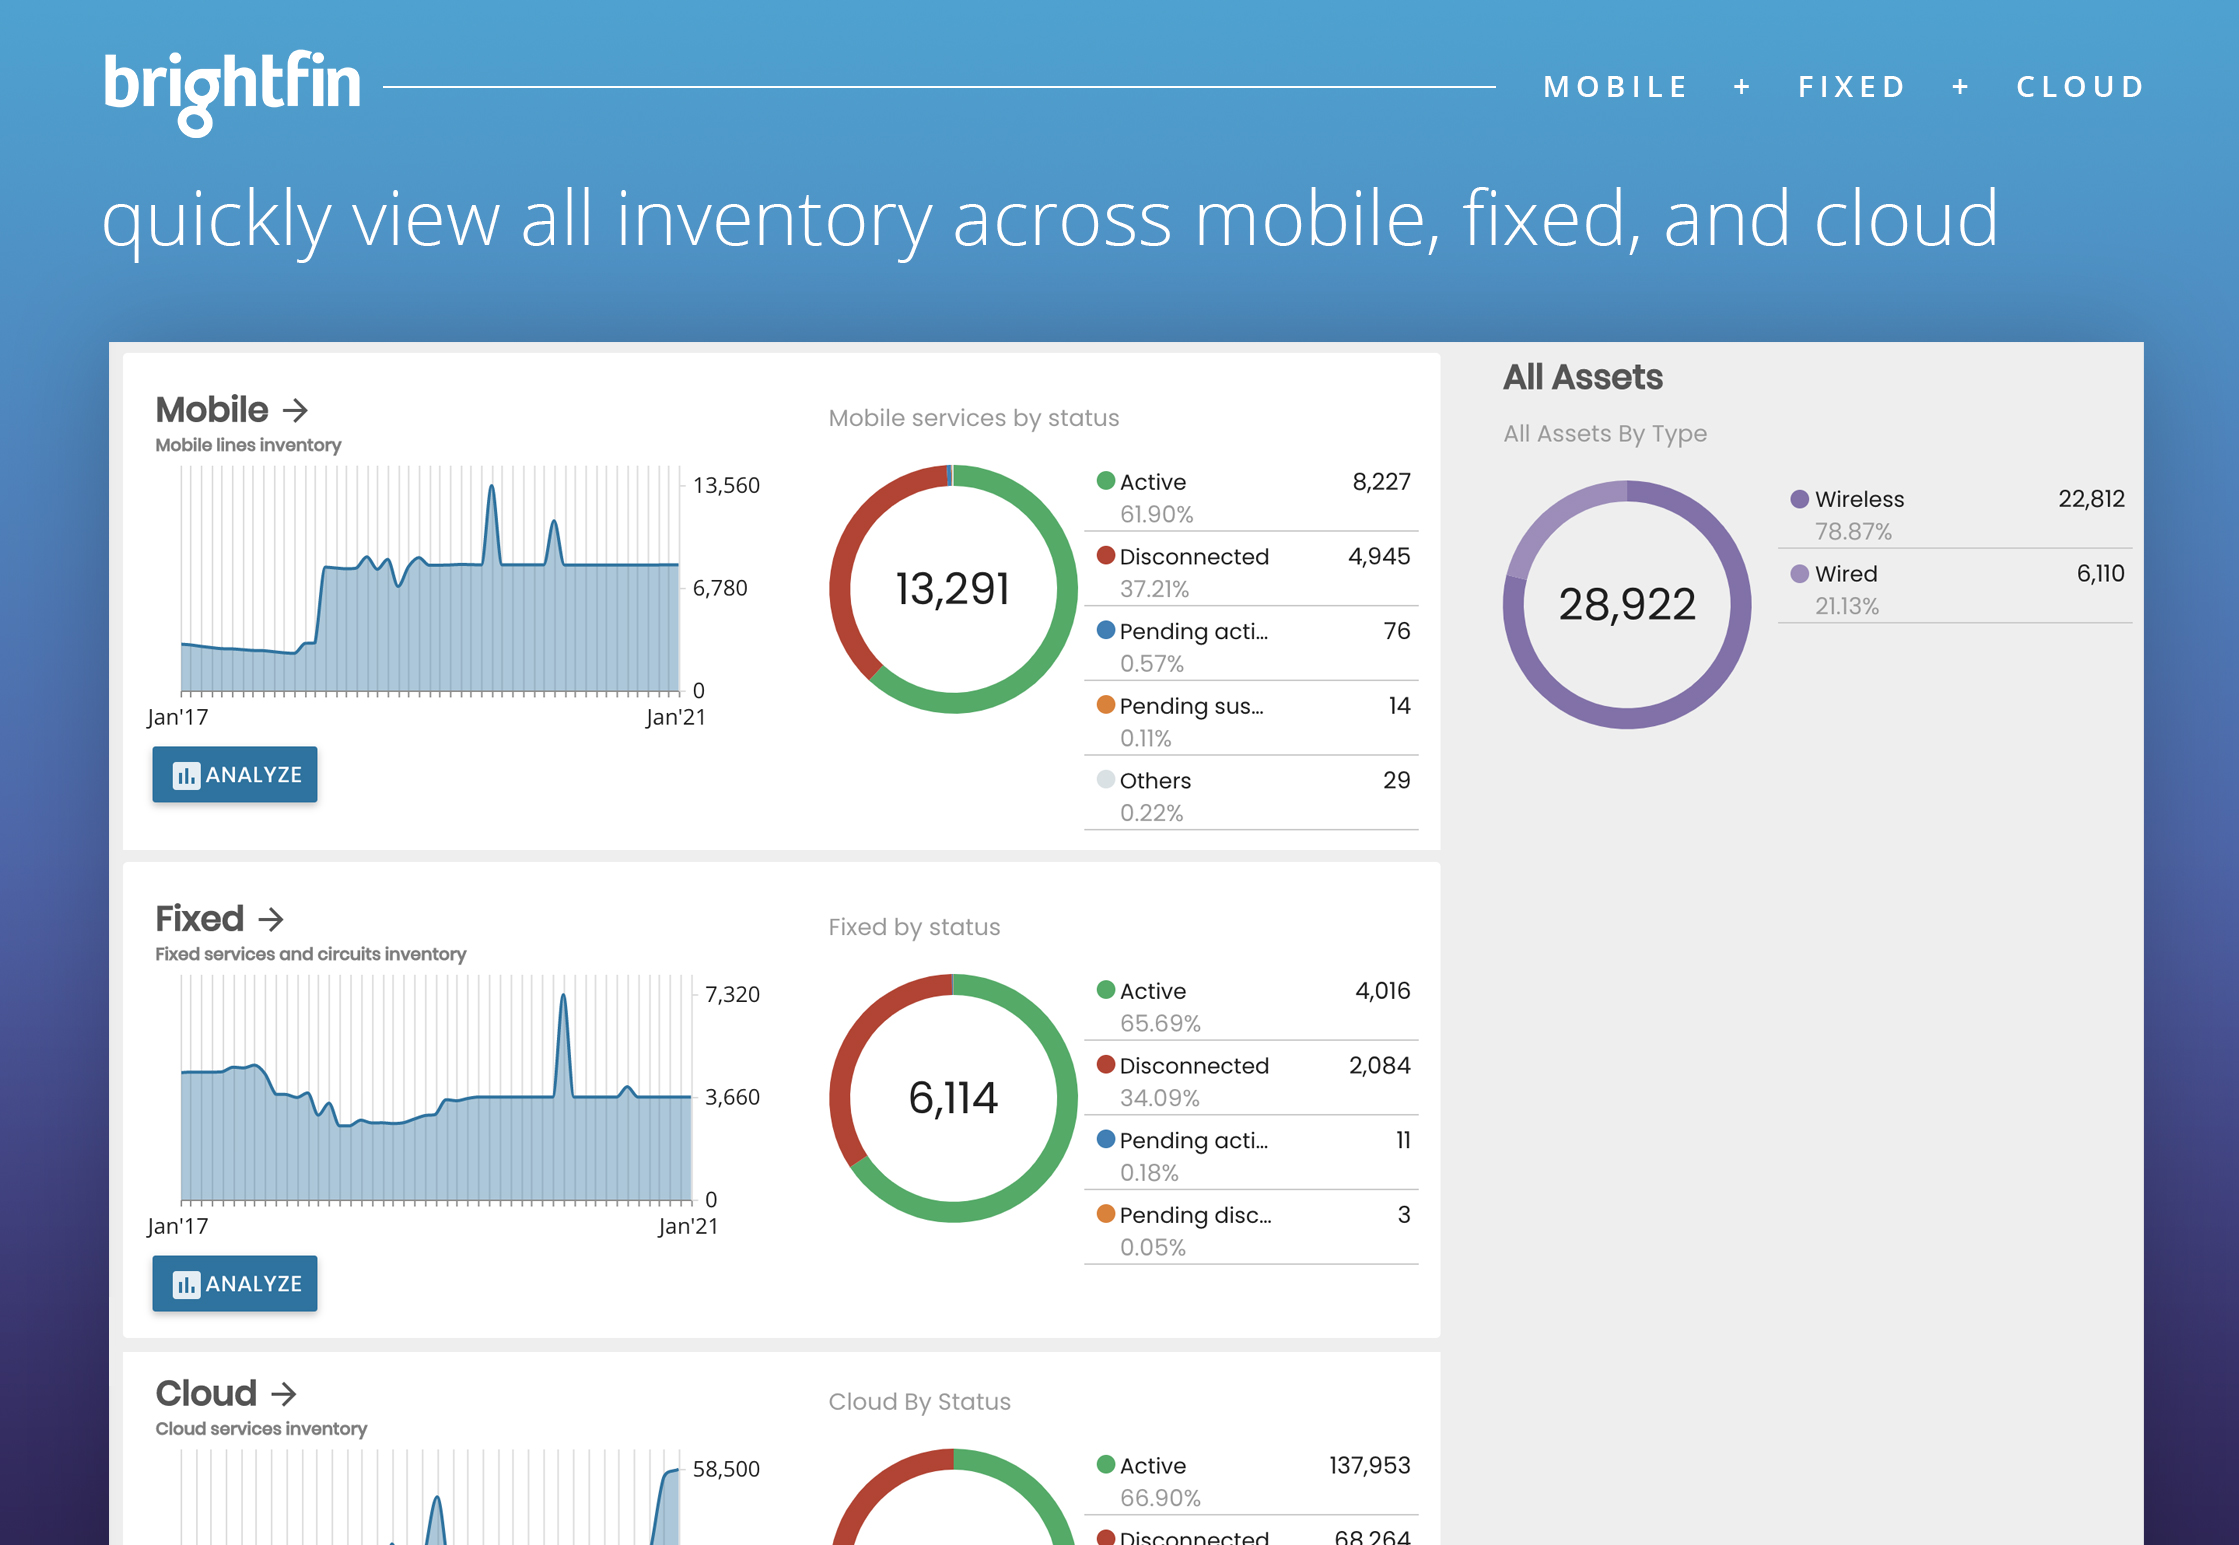 Quickly view all inventory across mobile, fixed, and cloud